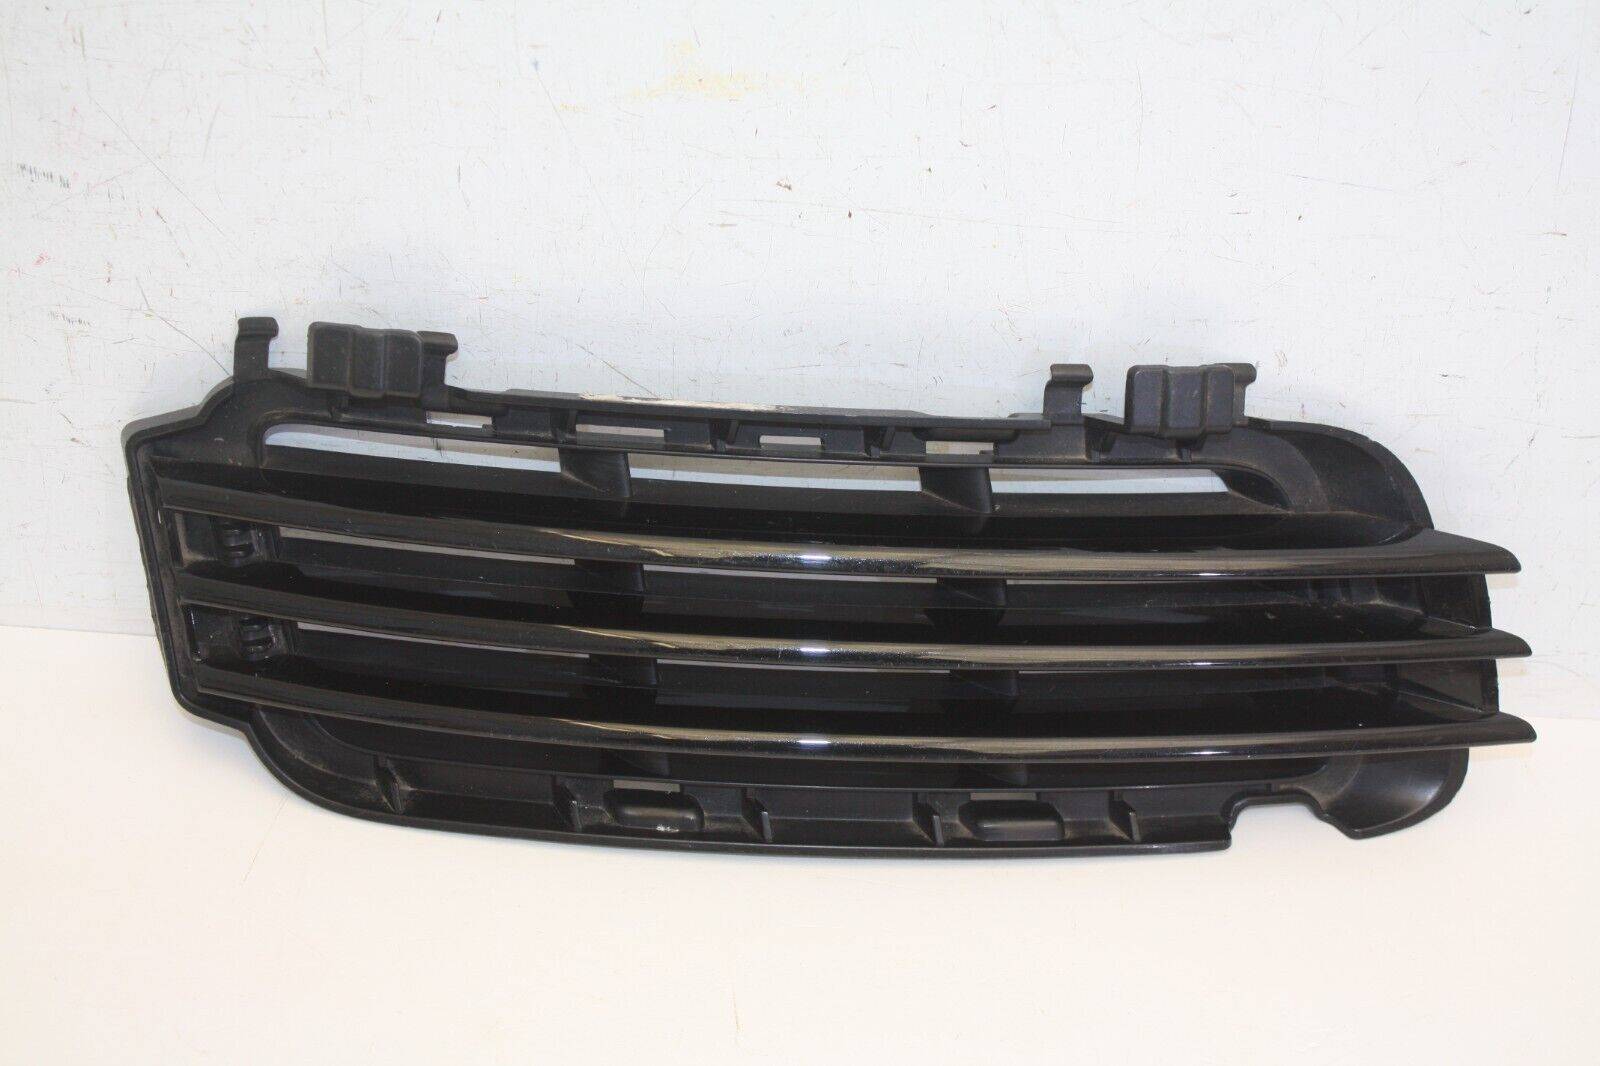 Range Rover Vogue Front Bumper Right Side Grill CK52 17F908 AA Genuine 176236996060